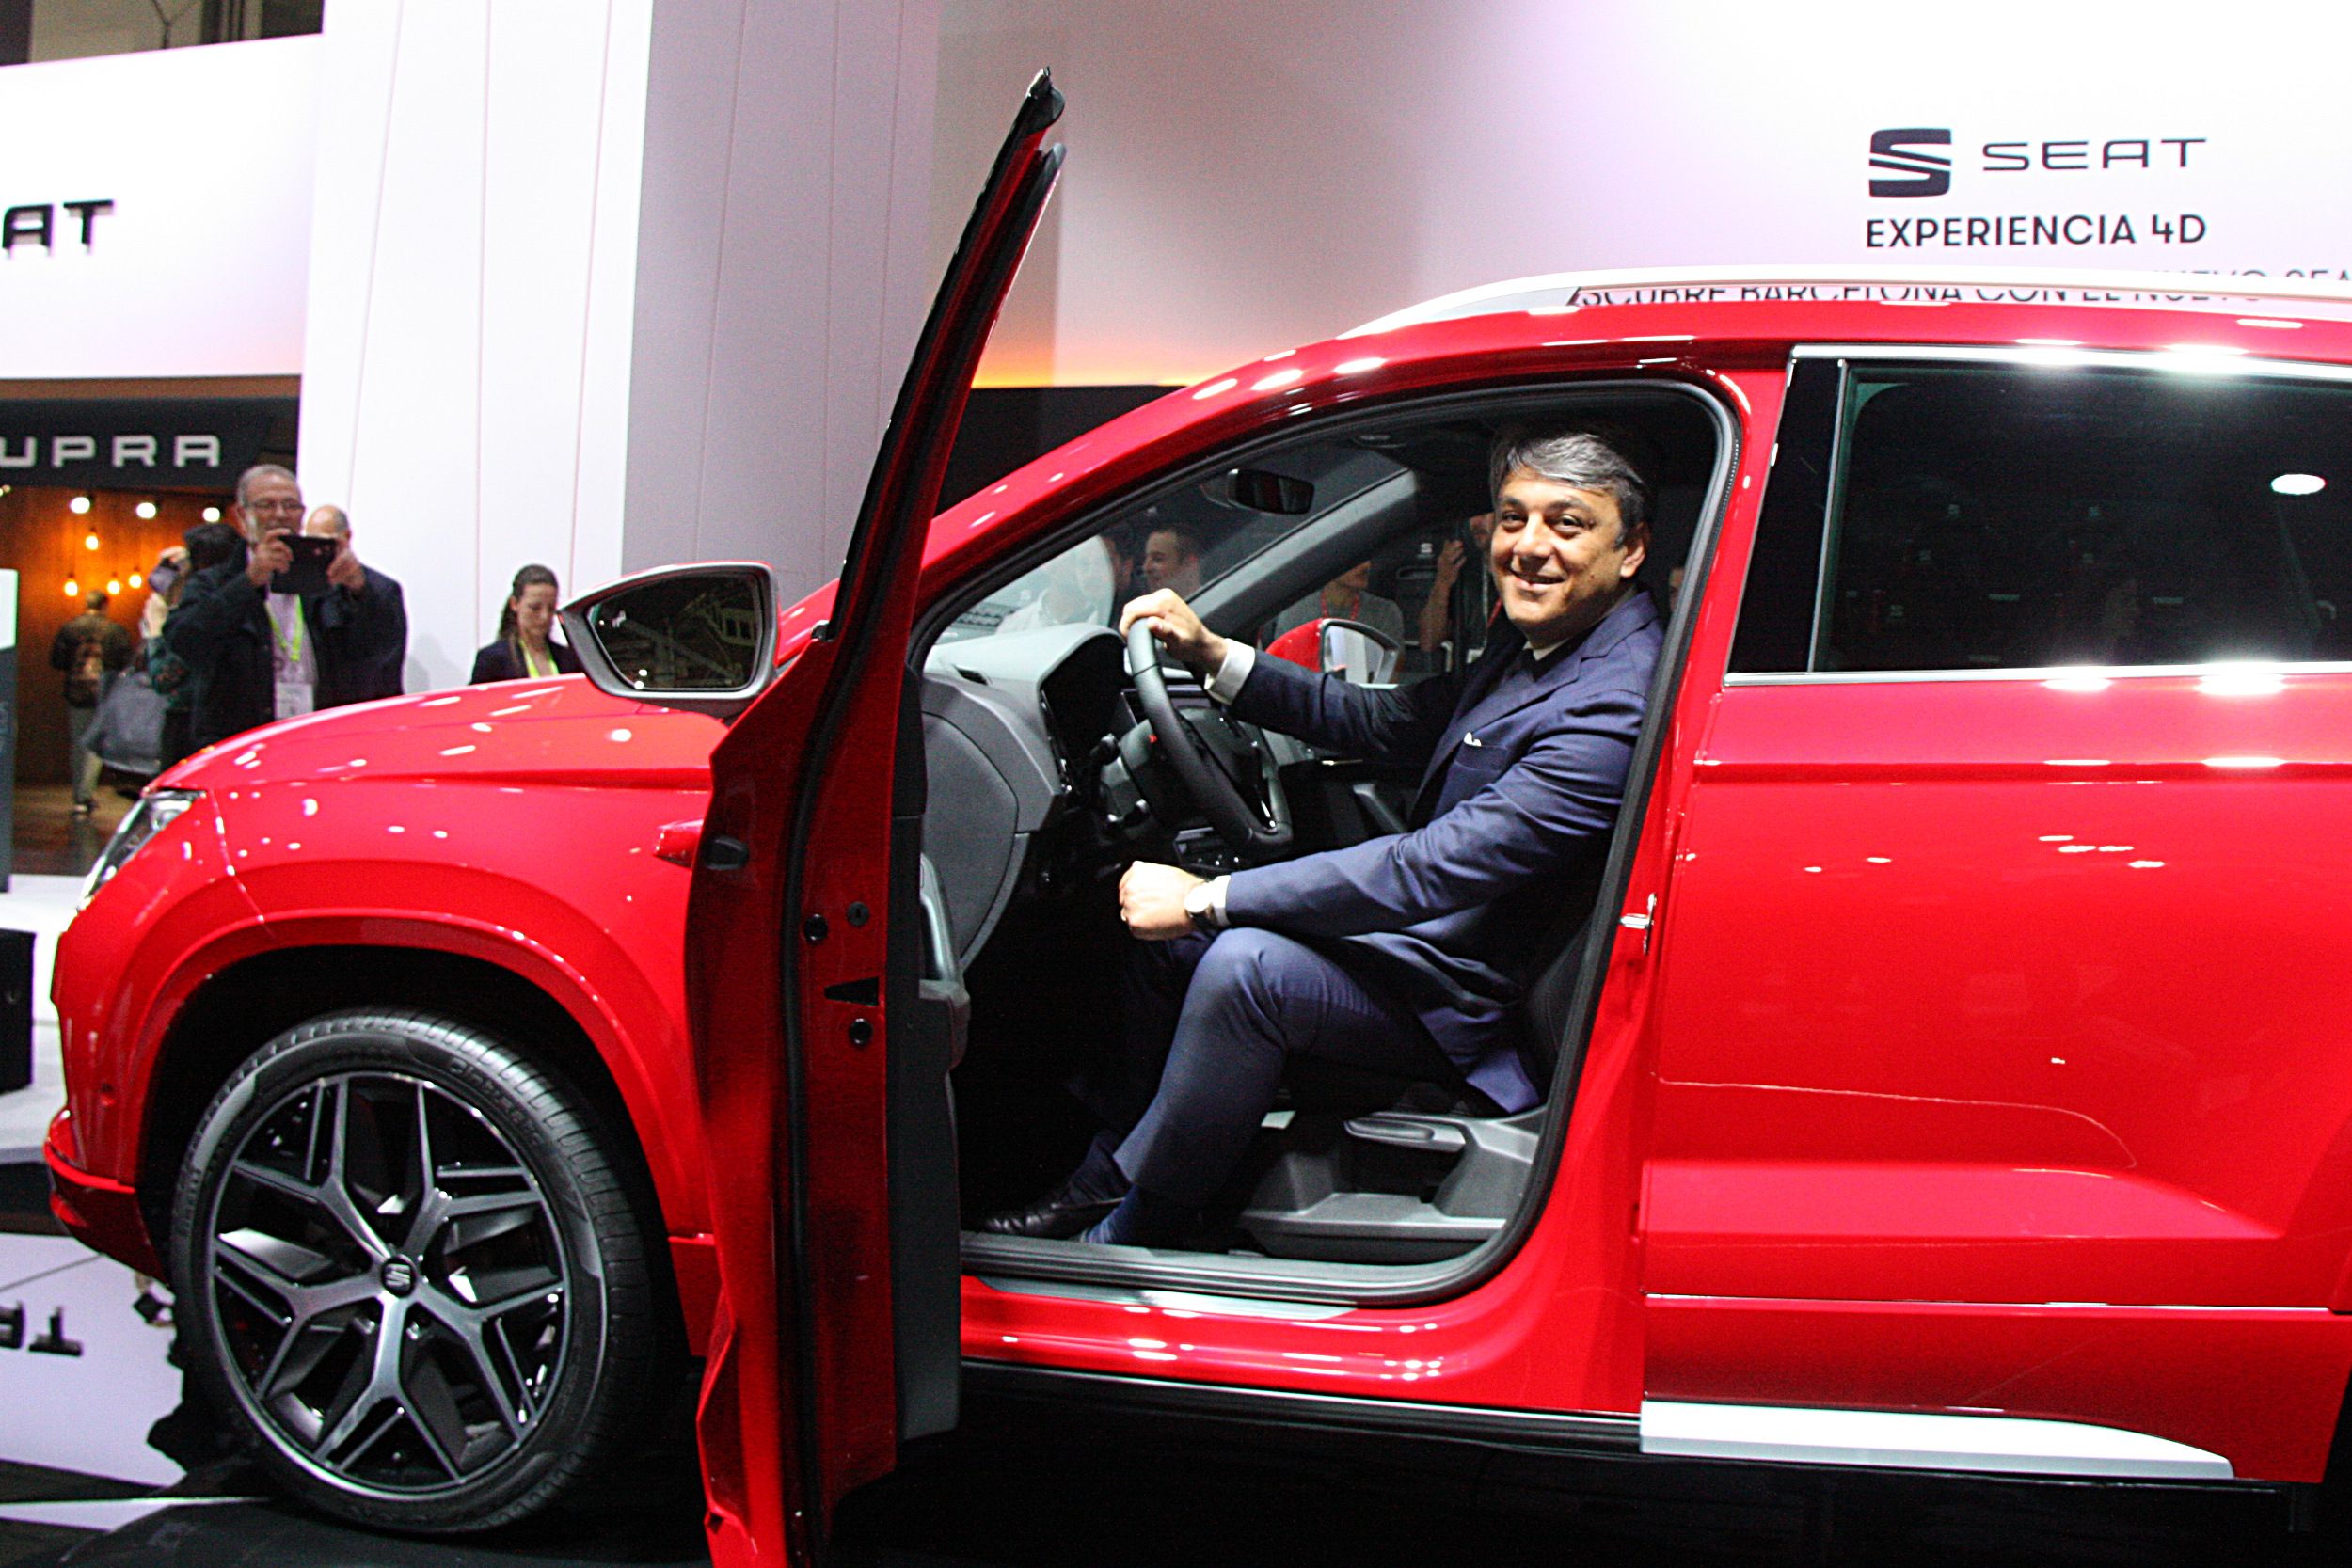 SEAT president Luca de Meo in one of the company's car models (by ACN)